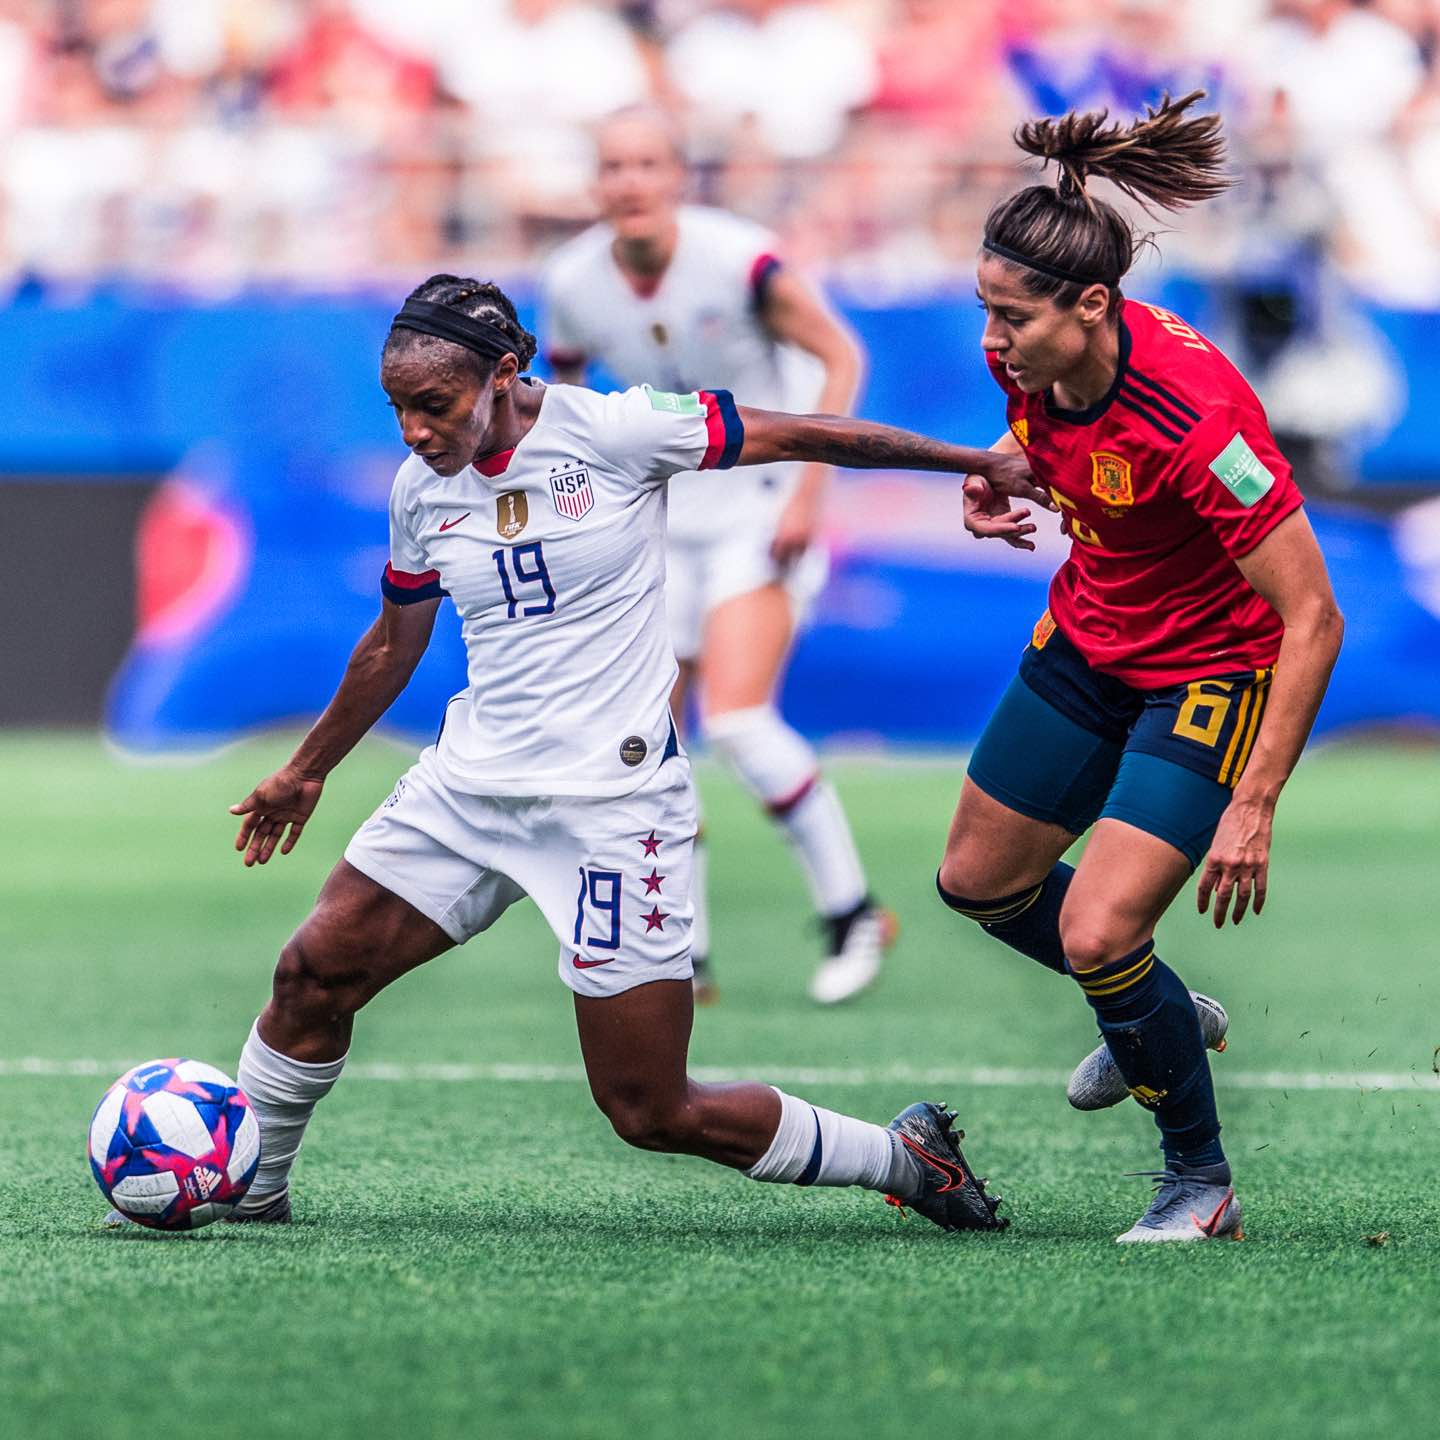 USA vs. Spain - Match History & Preview - Five Things to Know